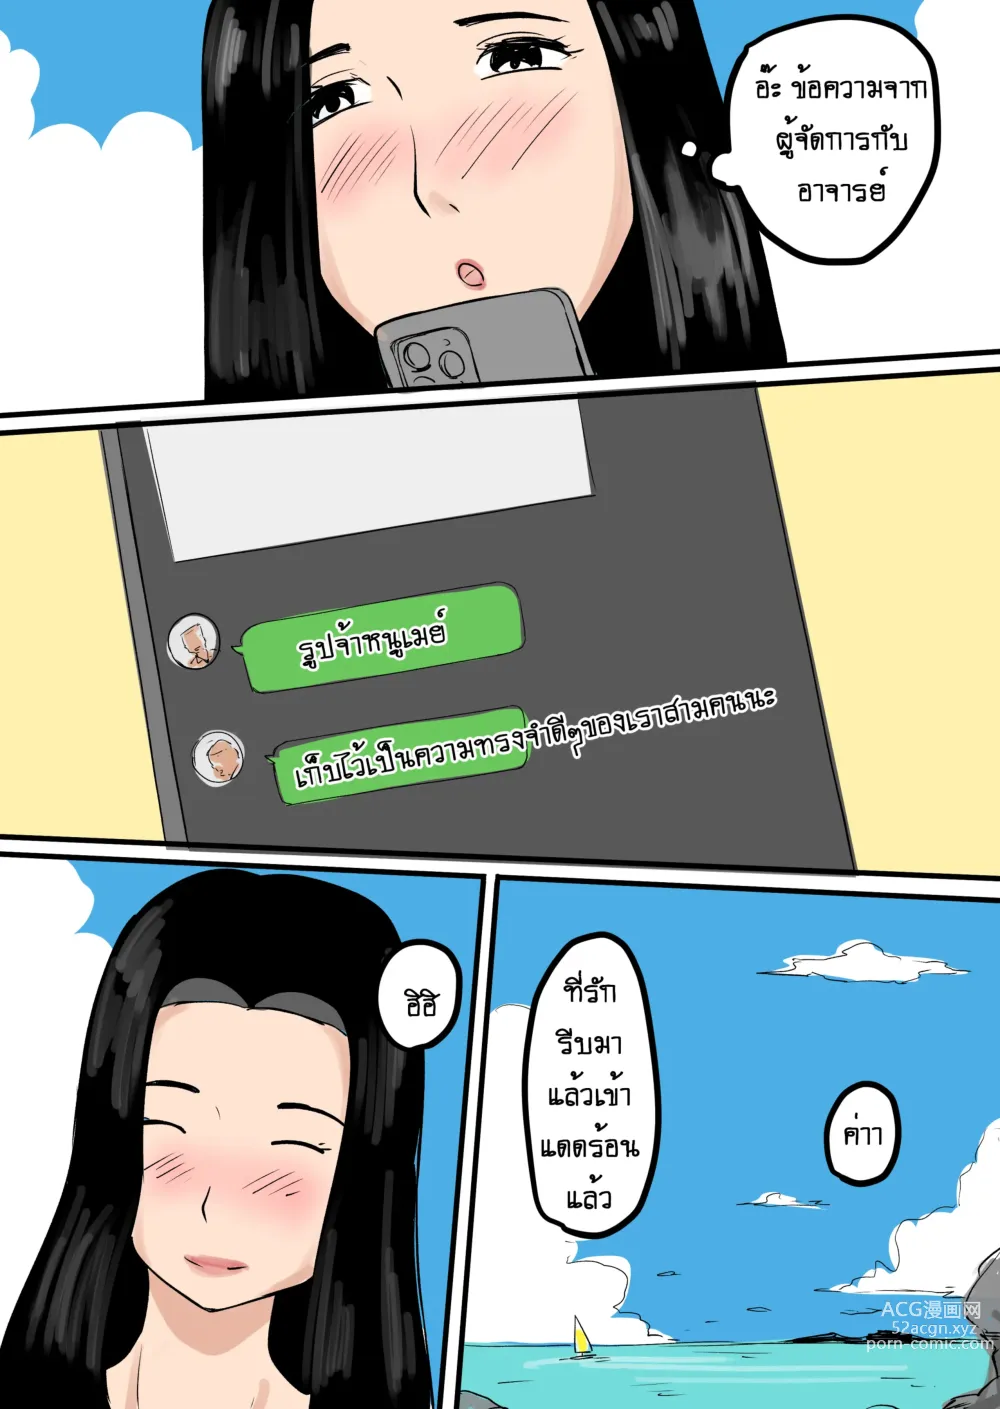 Page 55 of doujinshi My girlfriend is secretly lewd. แฟนผมแอบร่าน